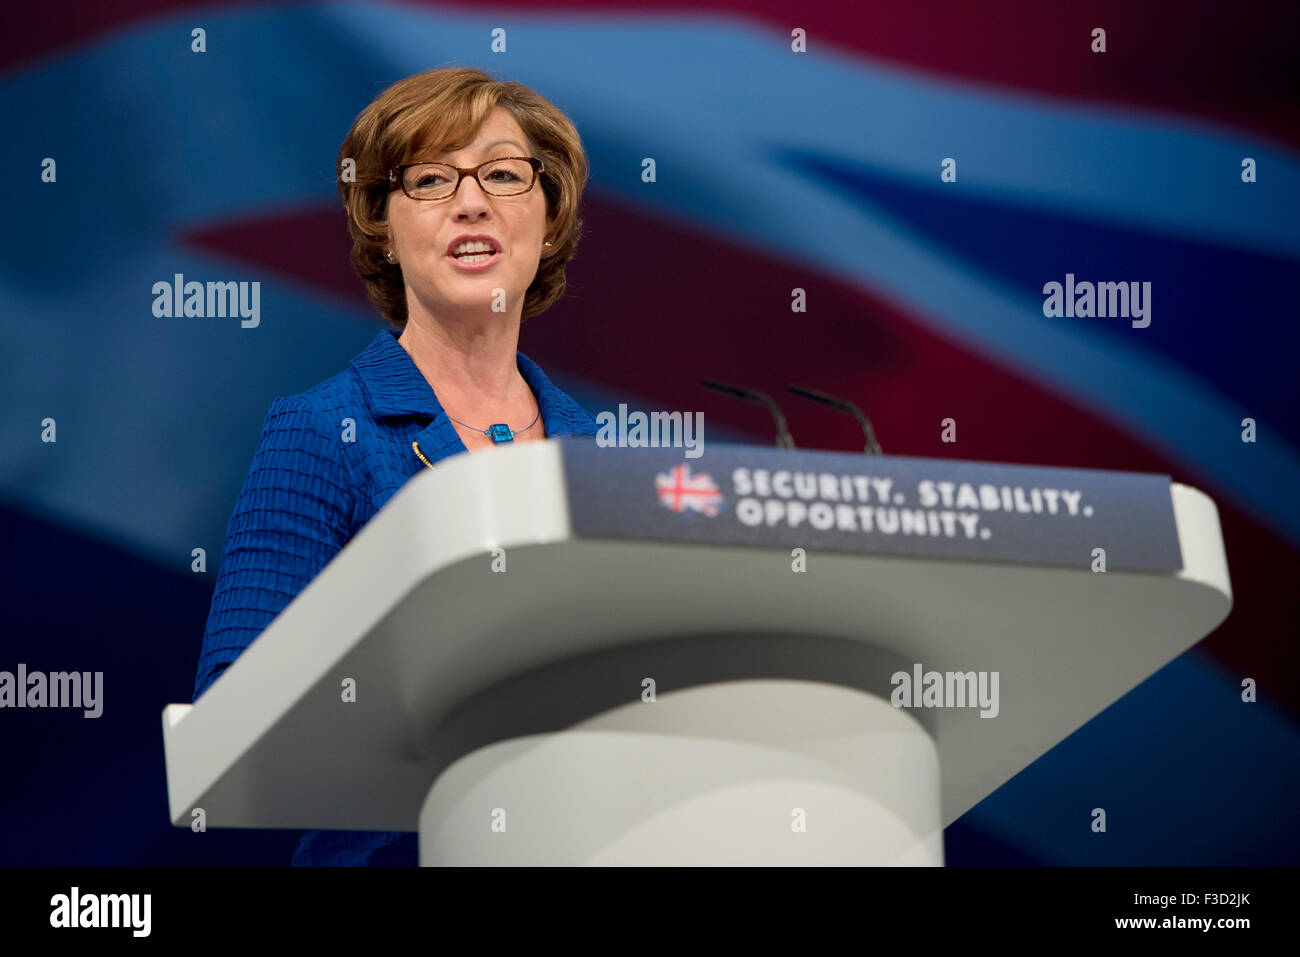 Manchester, UK. 5th October 2015. Rebecca Pow, MP for Taunton Deane speaks at Day 2 of the 2015 Conservative Party Conference in Manchester. Credit:  Russell Hart/Alamy Live News. Stock Photo